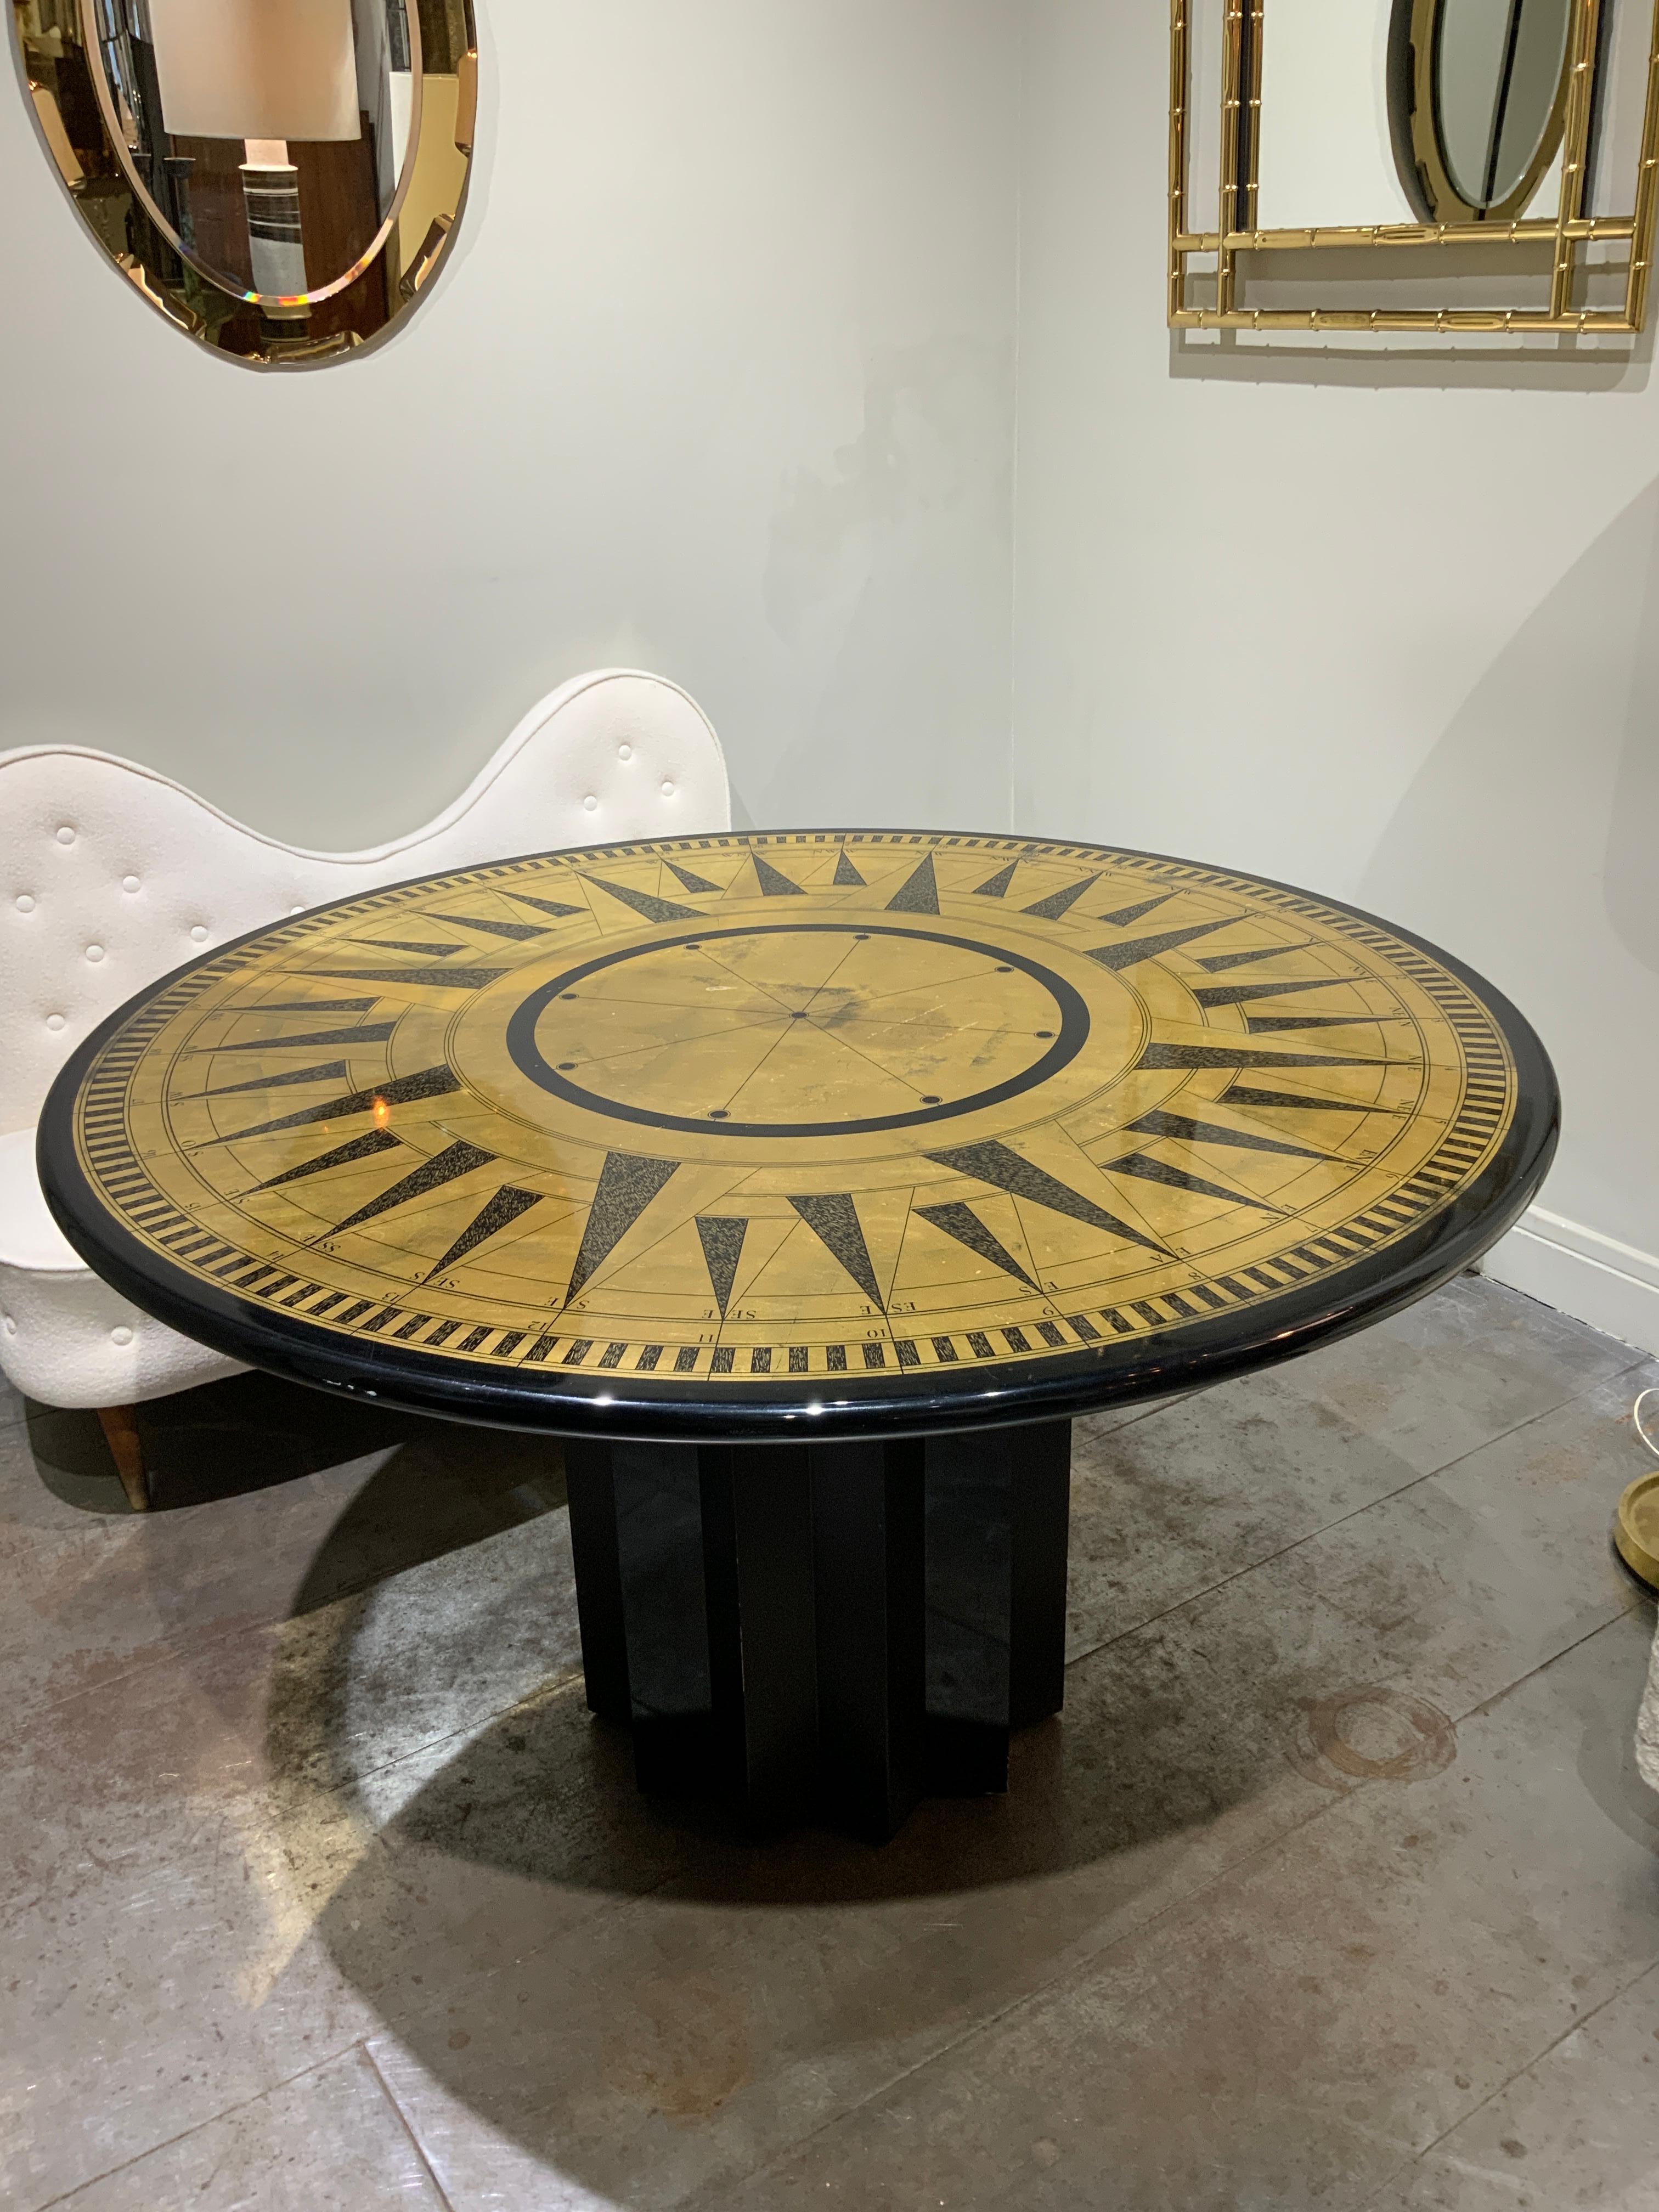 Beautifull Italian dining or center table circa 1970 in lacquered wood 
Top with compass rose in gold and black decoration 

